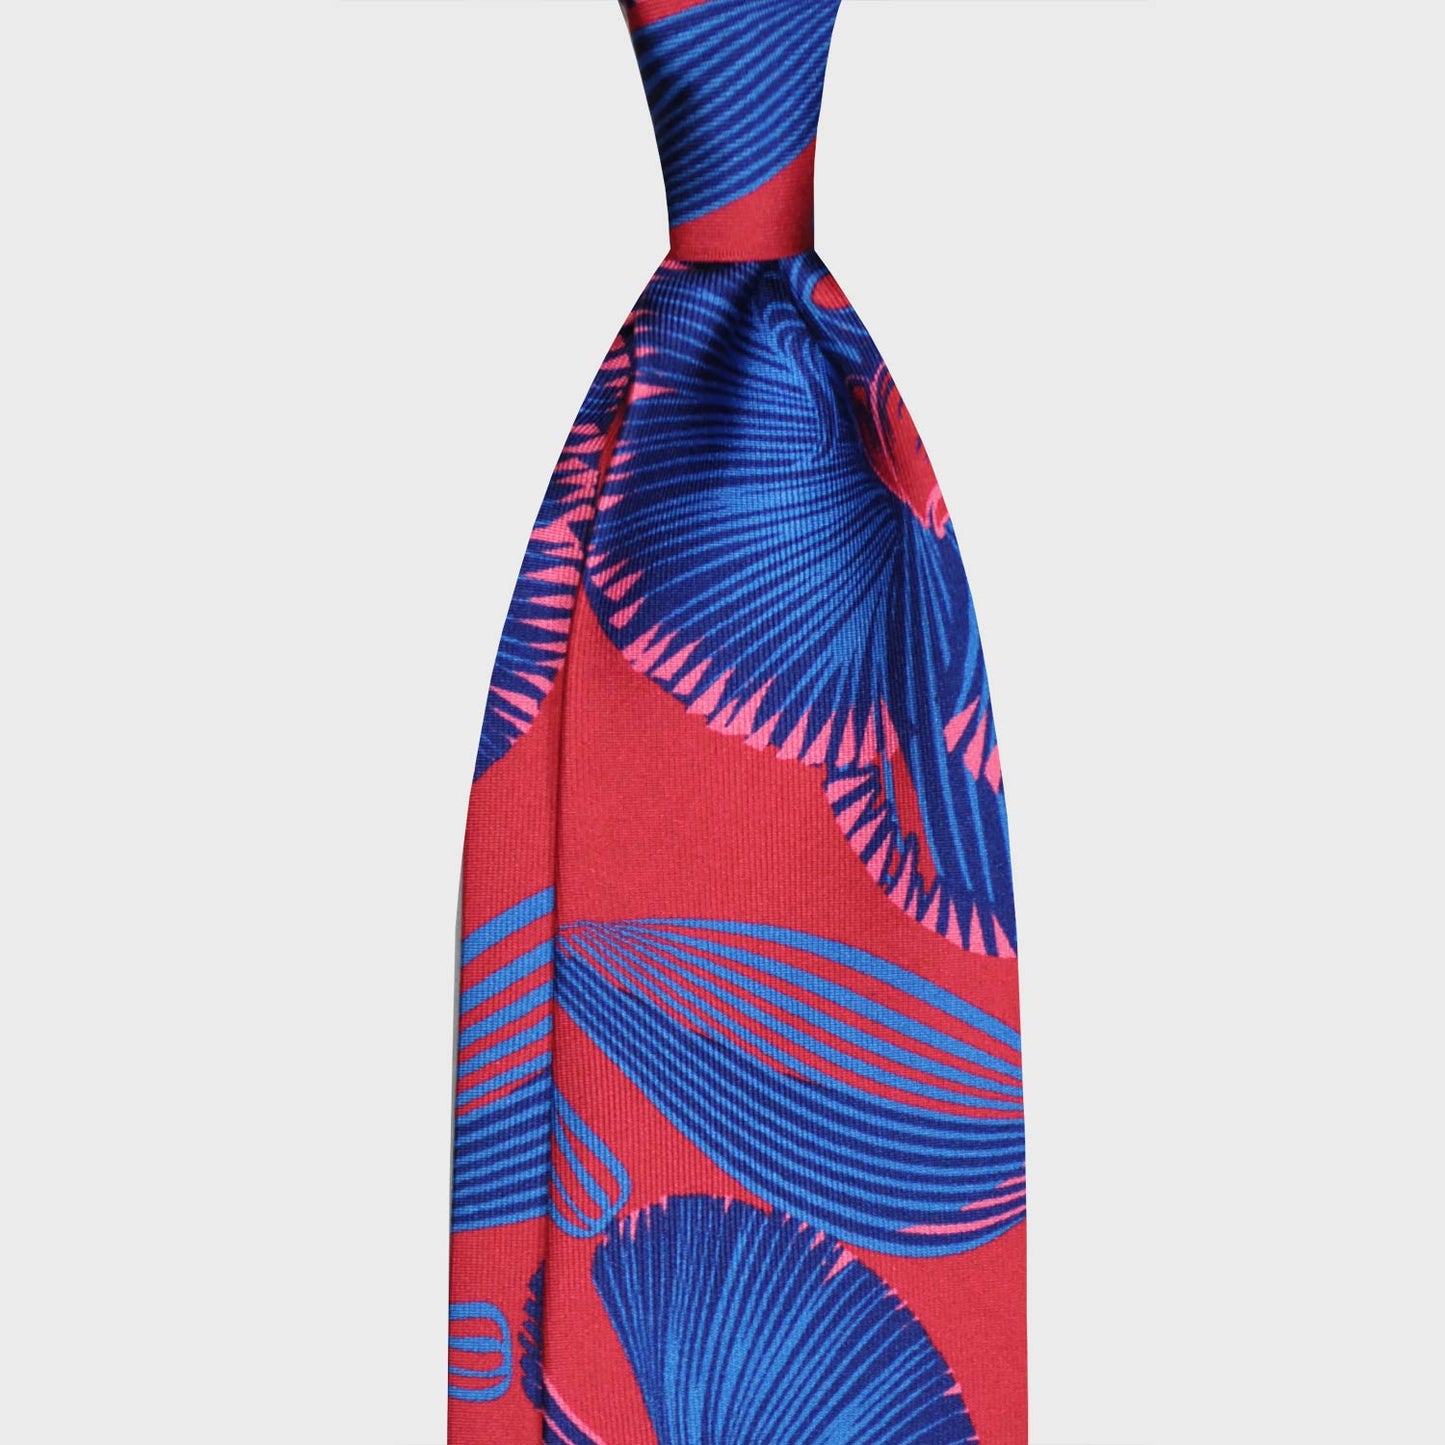 Magenta Red Silk Tie 3 Hawaiian Floral Pattern. Refined aloha silk tie floral pattern, hand made in Italy by F.Marino Napoli exclusive for Wools Boutique Uomo, unlined hand rolled edge, magenta red background with electric blue Hawaii flowers pattern